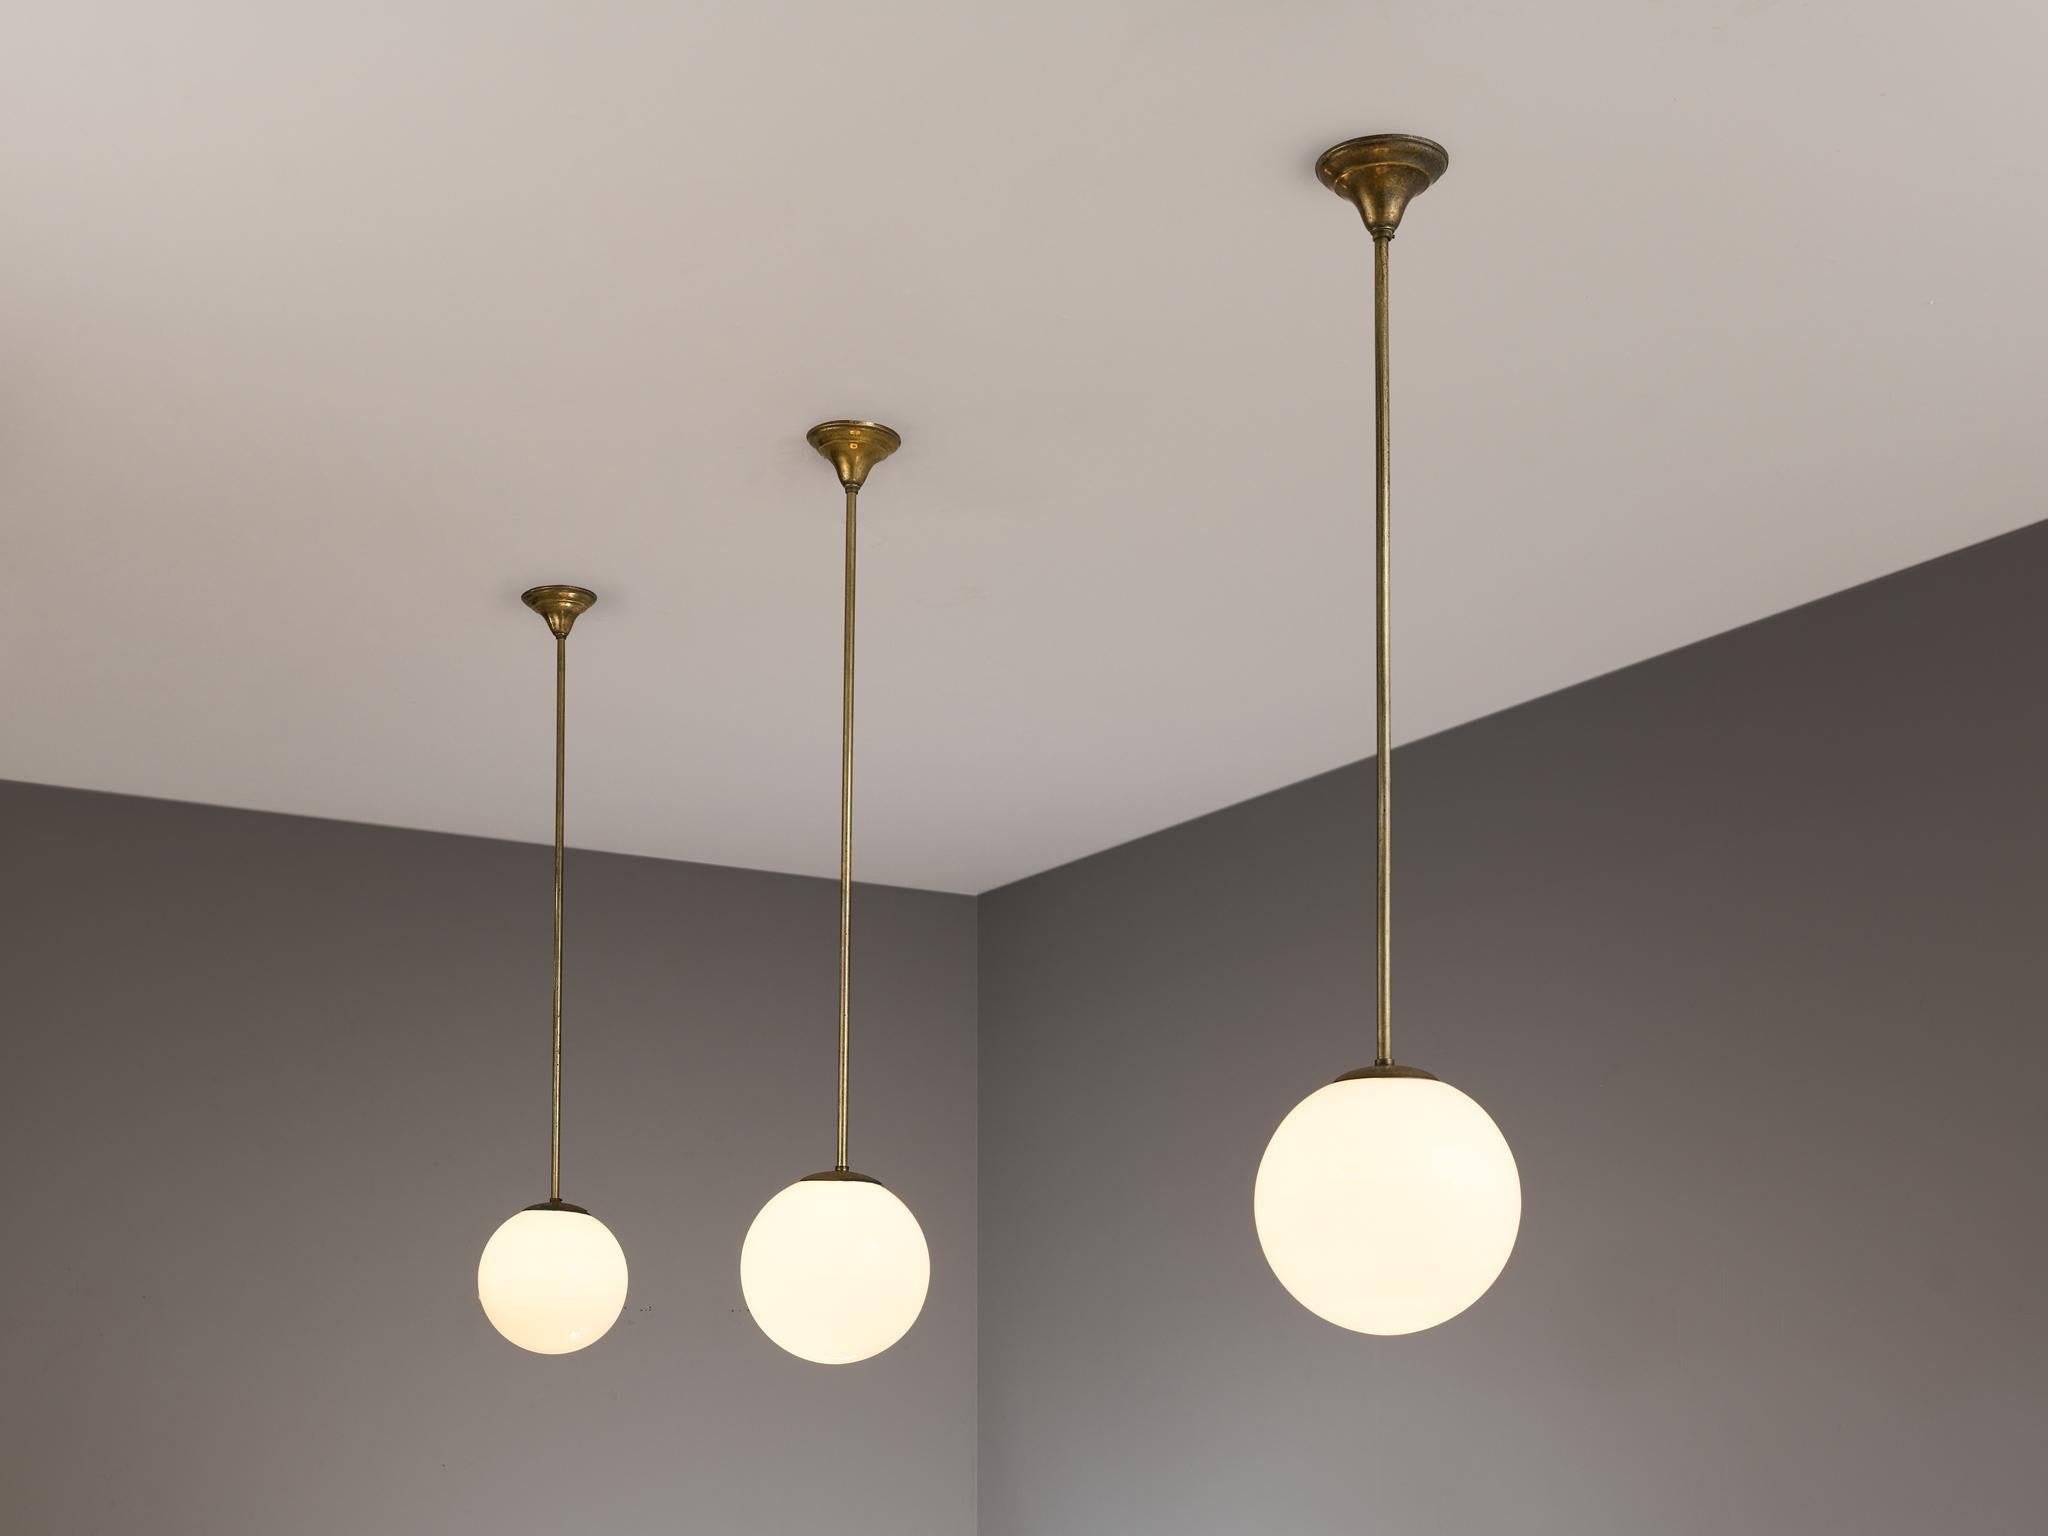 Pendants, opaline glass, Europe, 1960s.

These atmospheric pendant lamps features each an opaline glass orb. This results in a nice and soft light-tone creating a lively ambience in the room. The sphere is suspended by an elongated brass fixture.